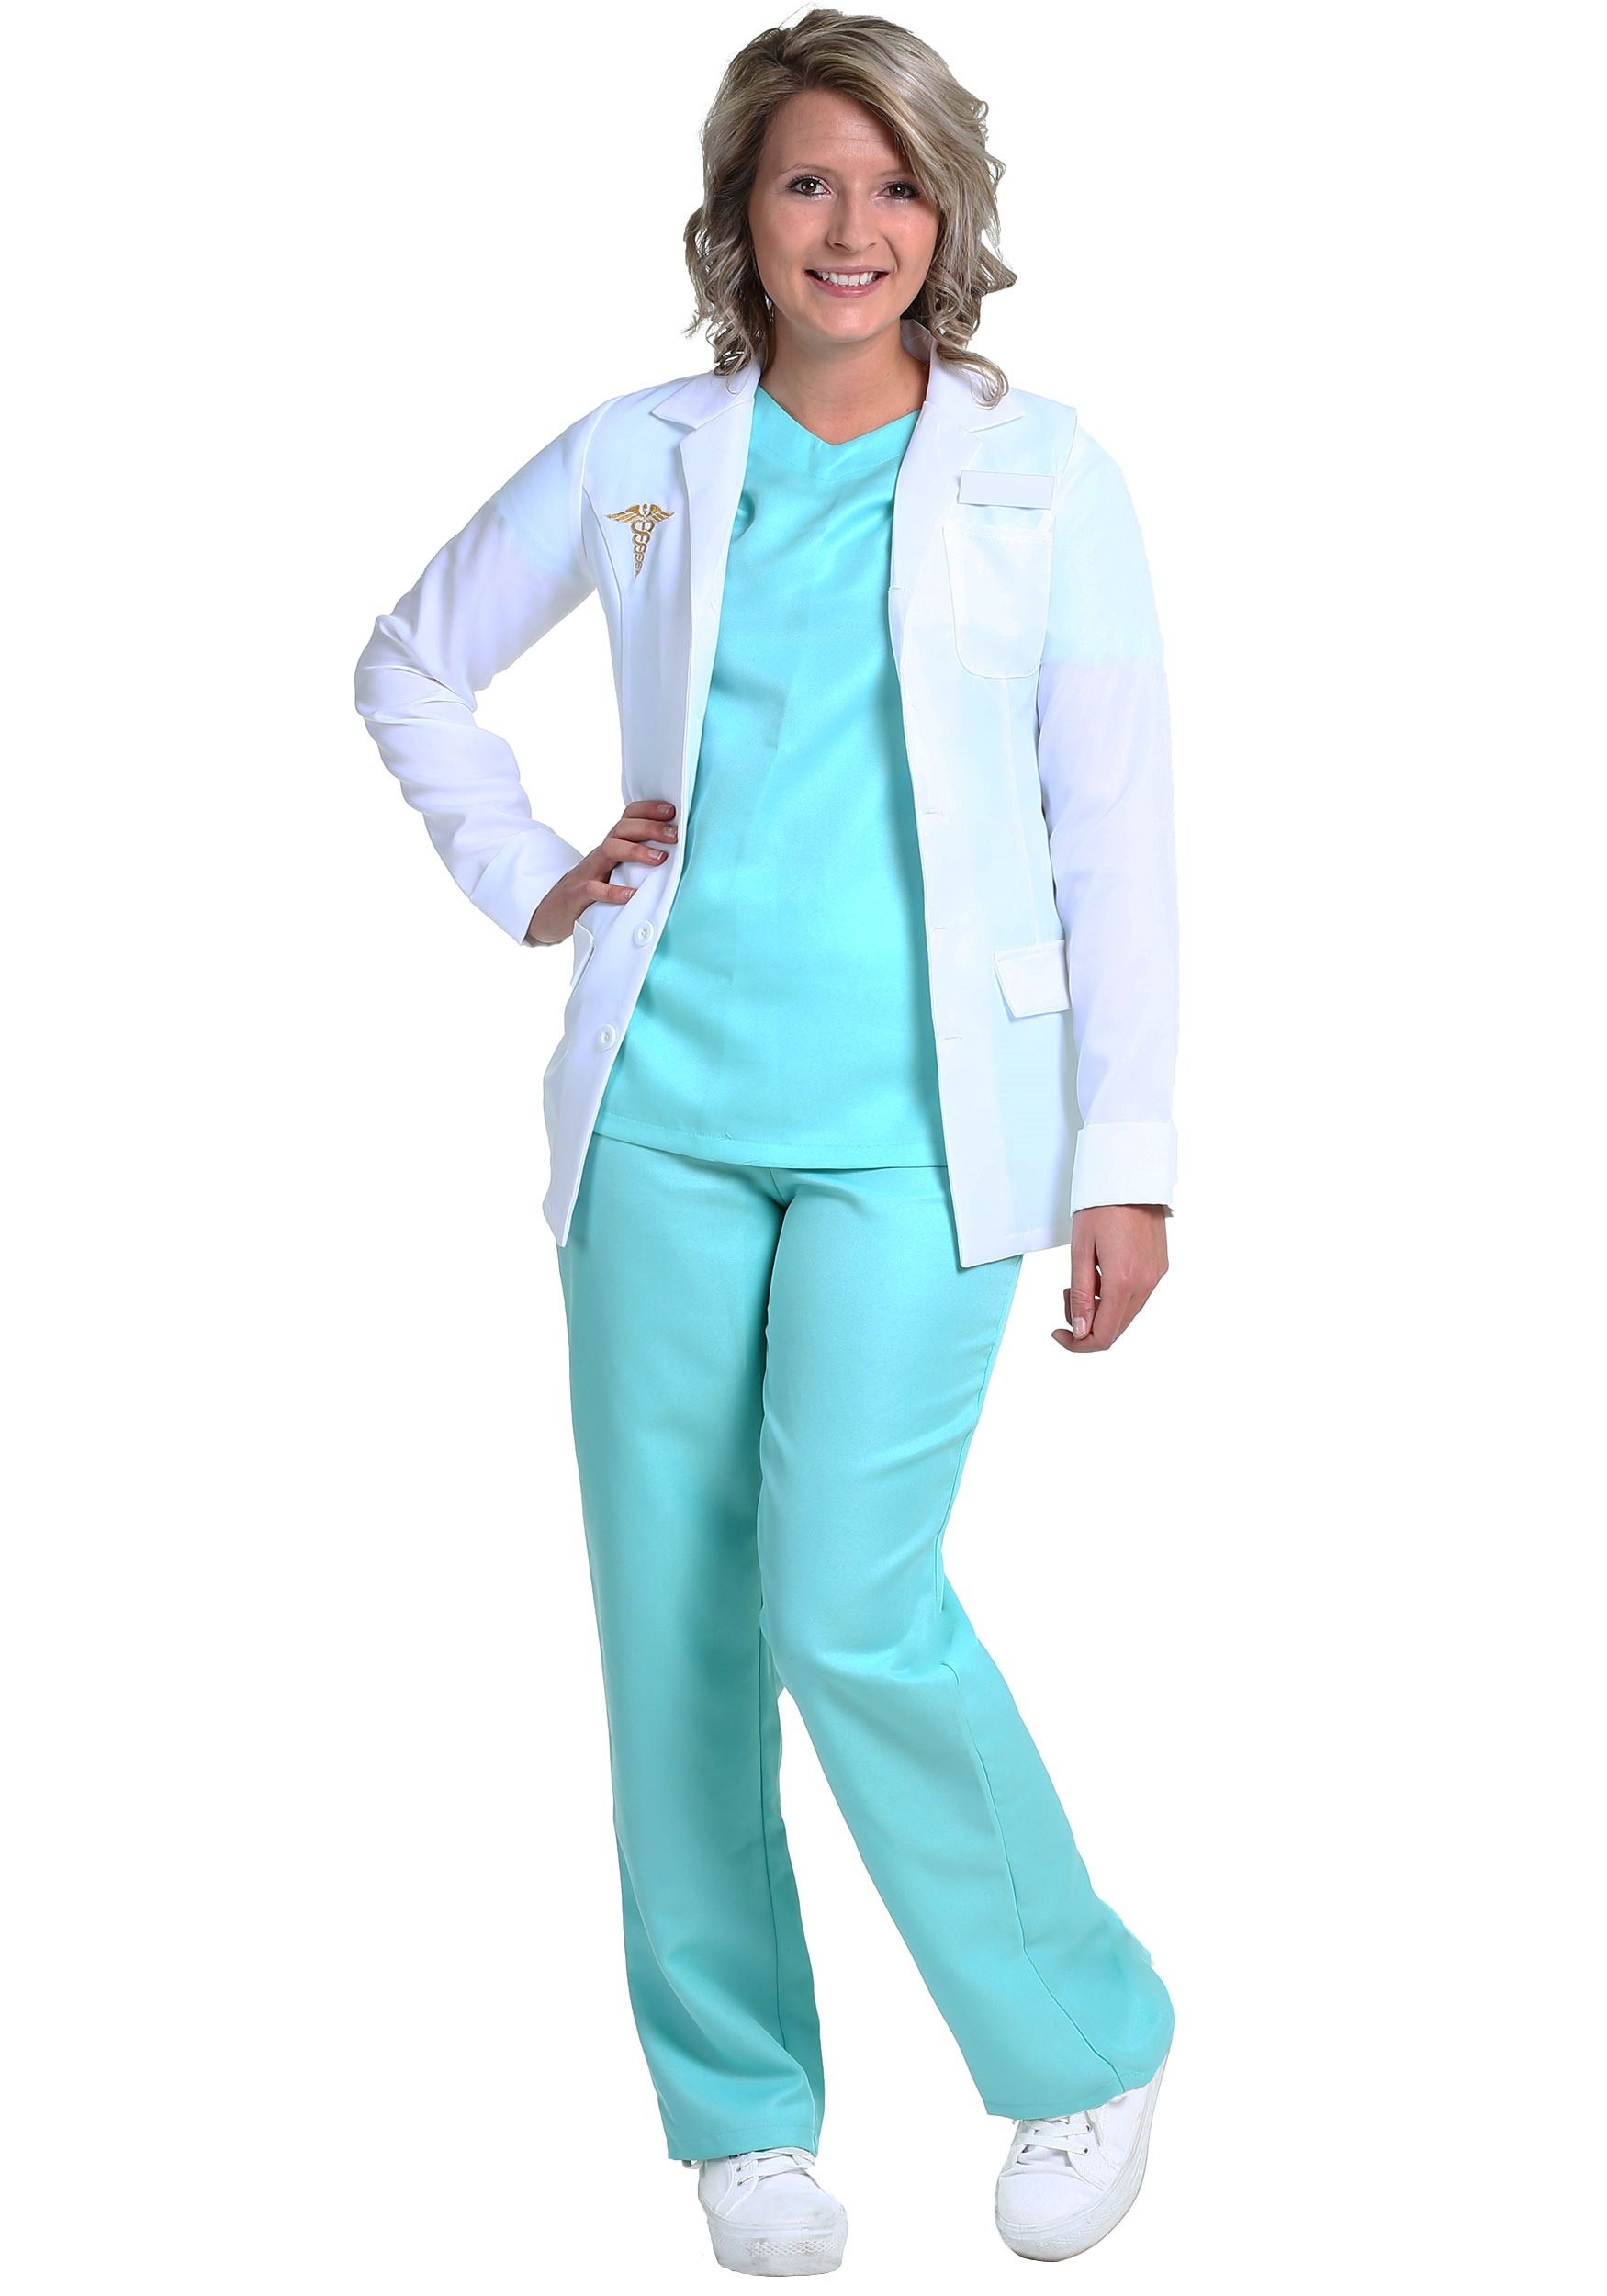 Photos - Fancy Dress FUN Costumes Doctor Costume for Women Blue/White